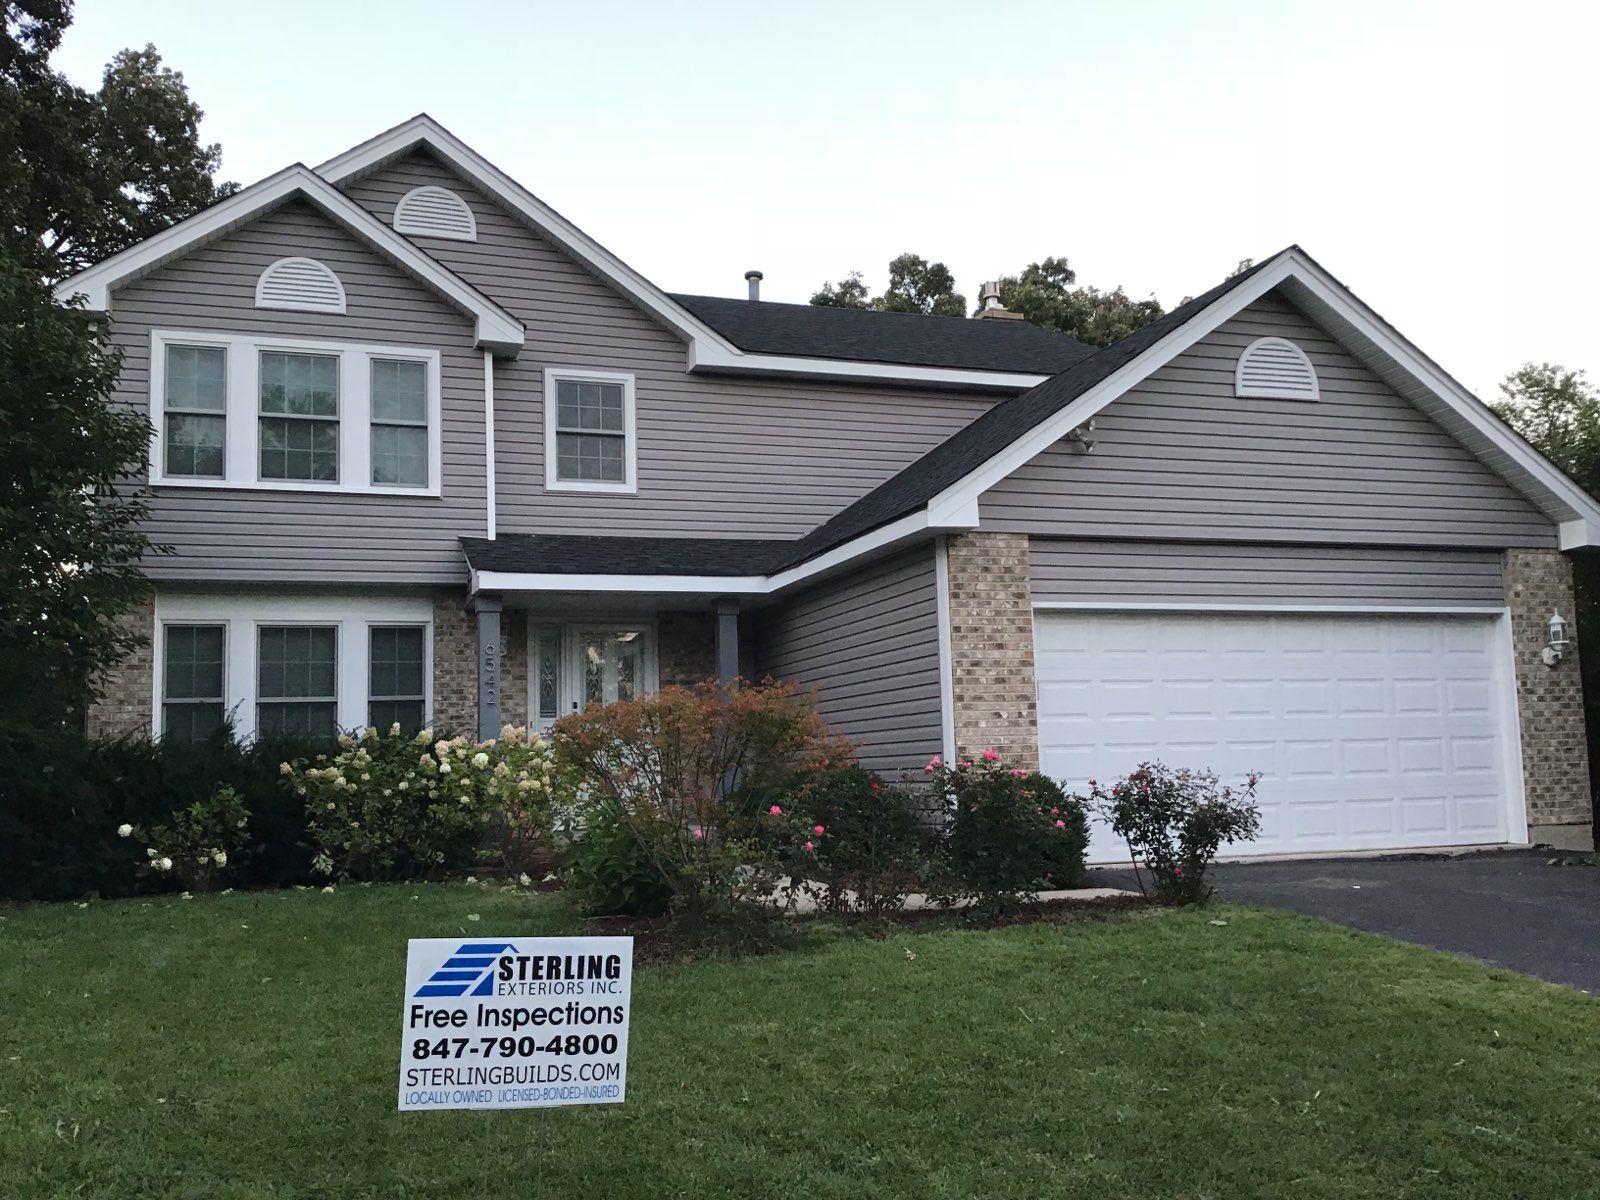 Completion of a roof replacement project in Barrington, IL